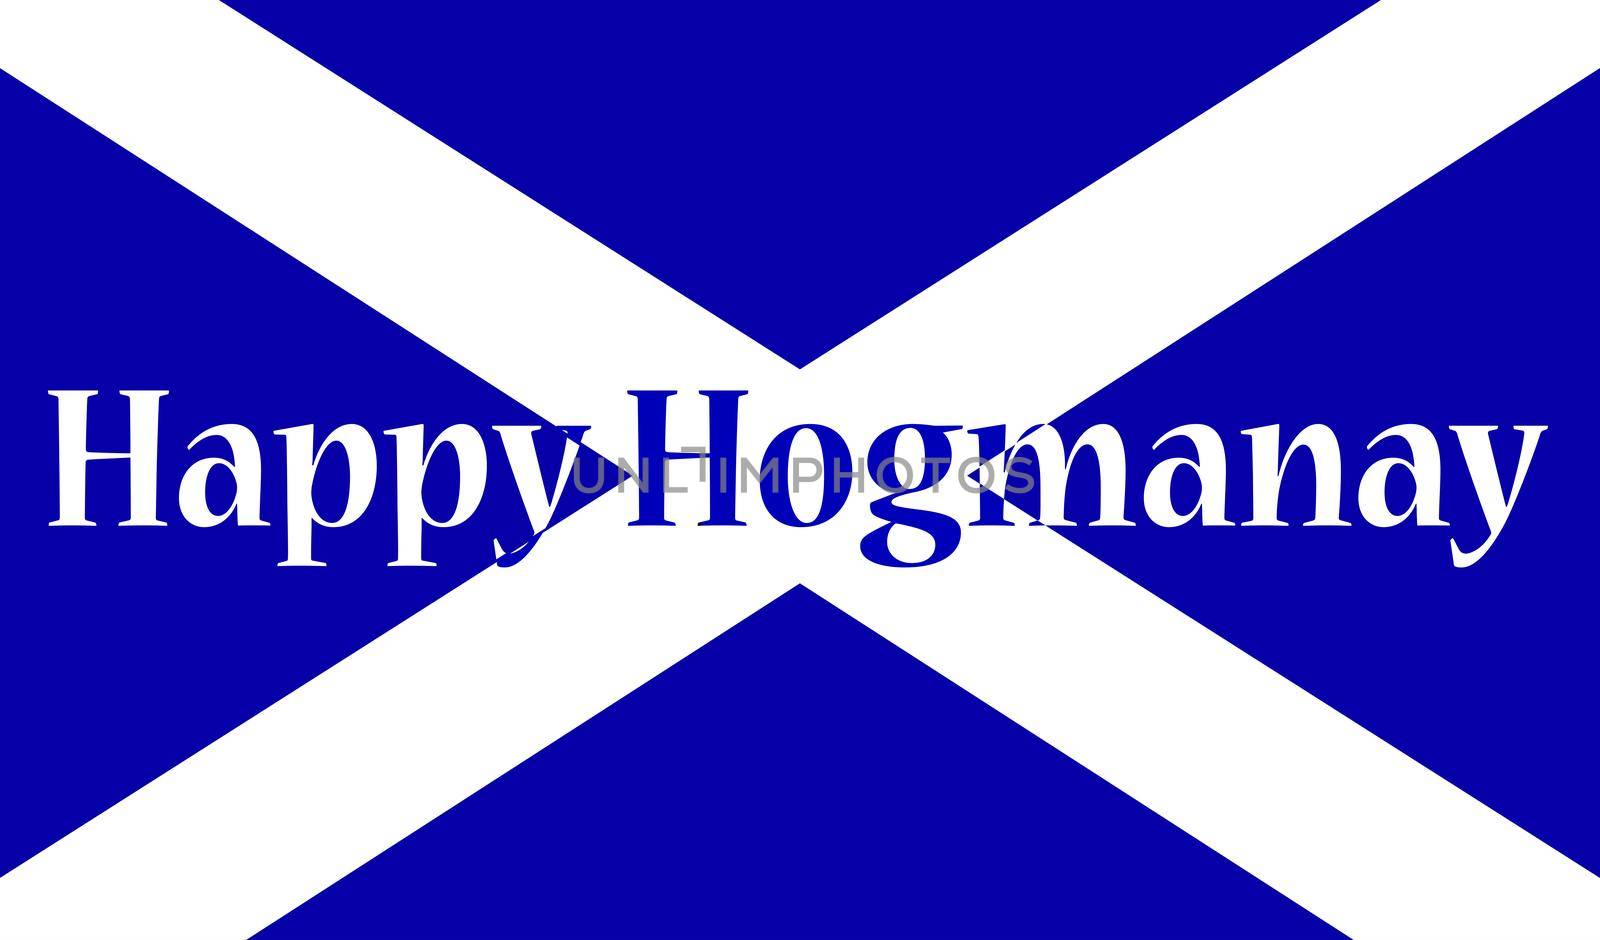 The official flag for Scotland with the traditional Scott New Years message Happy Hogmanay